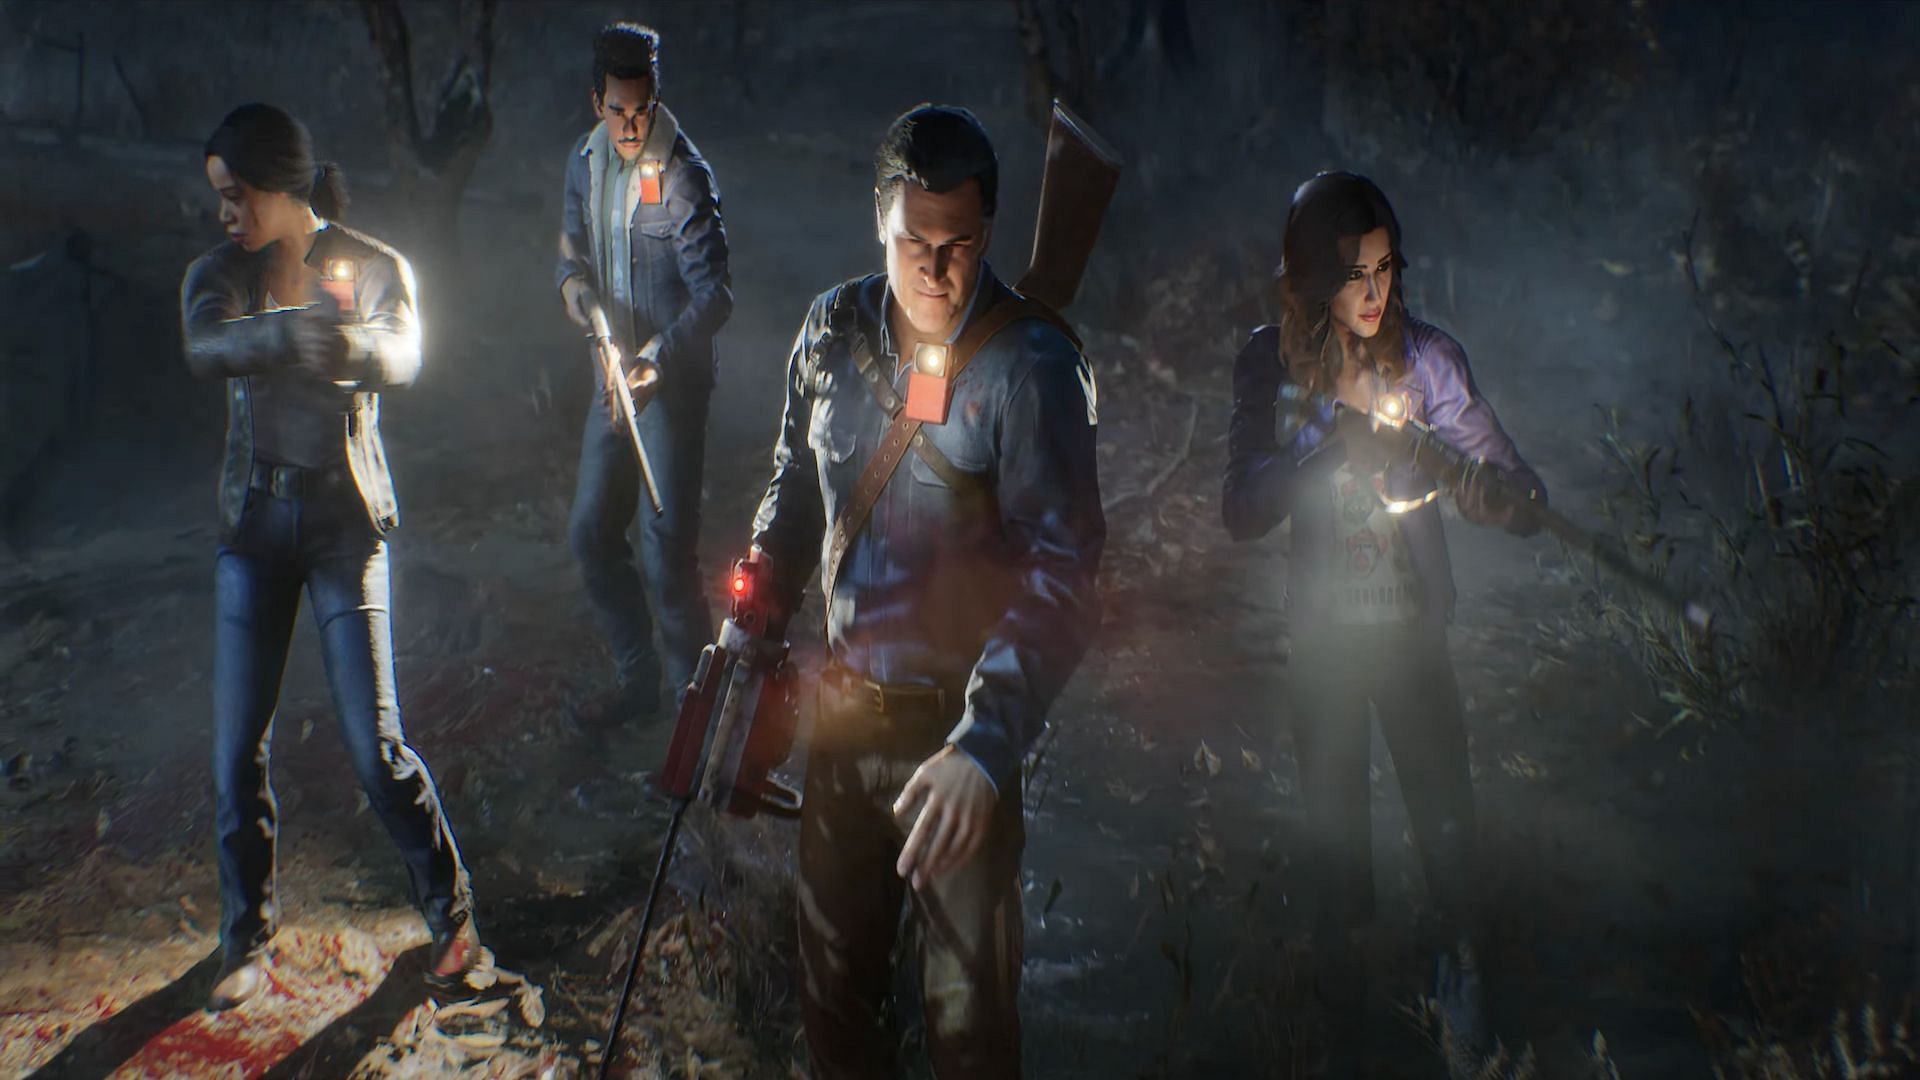 Players of Evil Dead: The Game can choose between multiple Survivor types to complement their playstyle (Image via Saber Interactive)